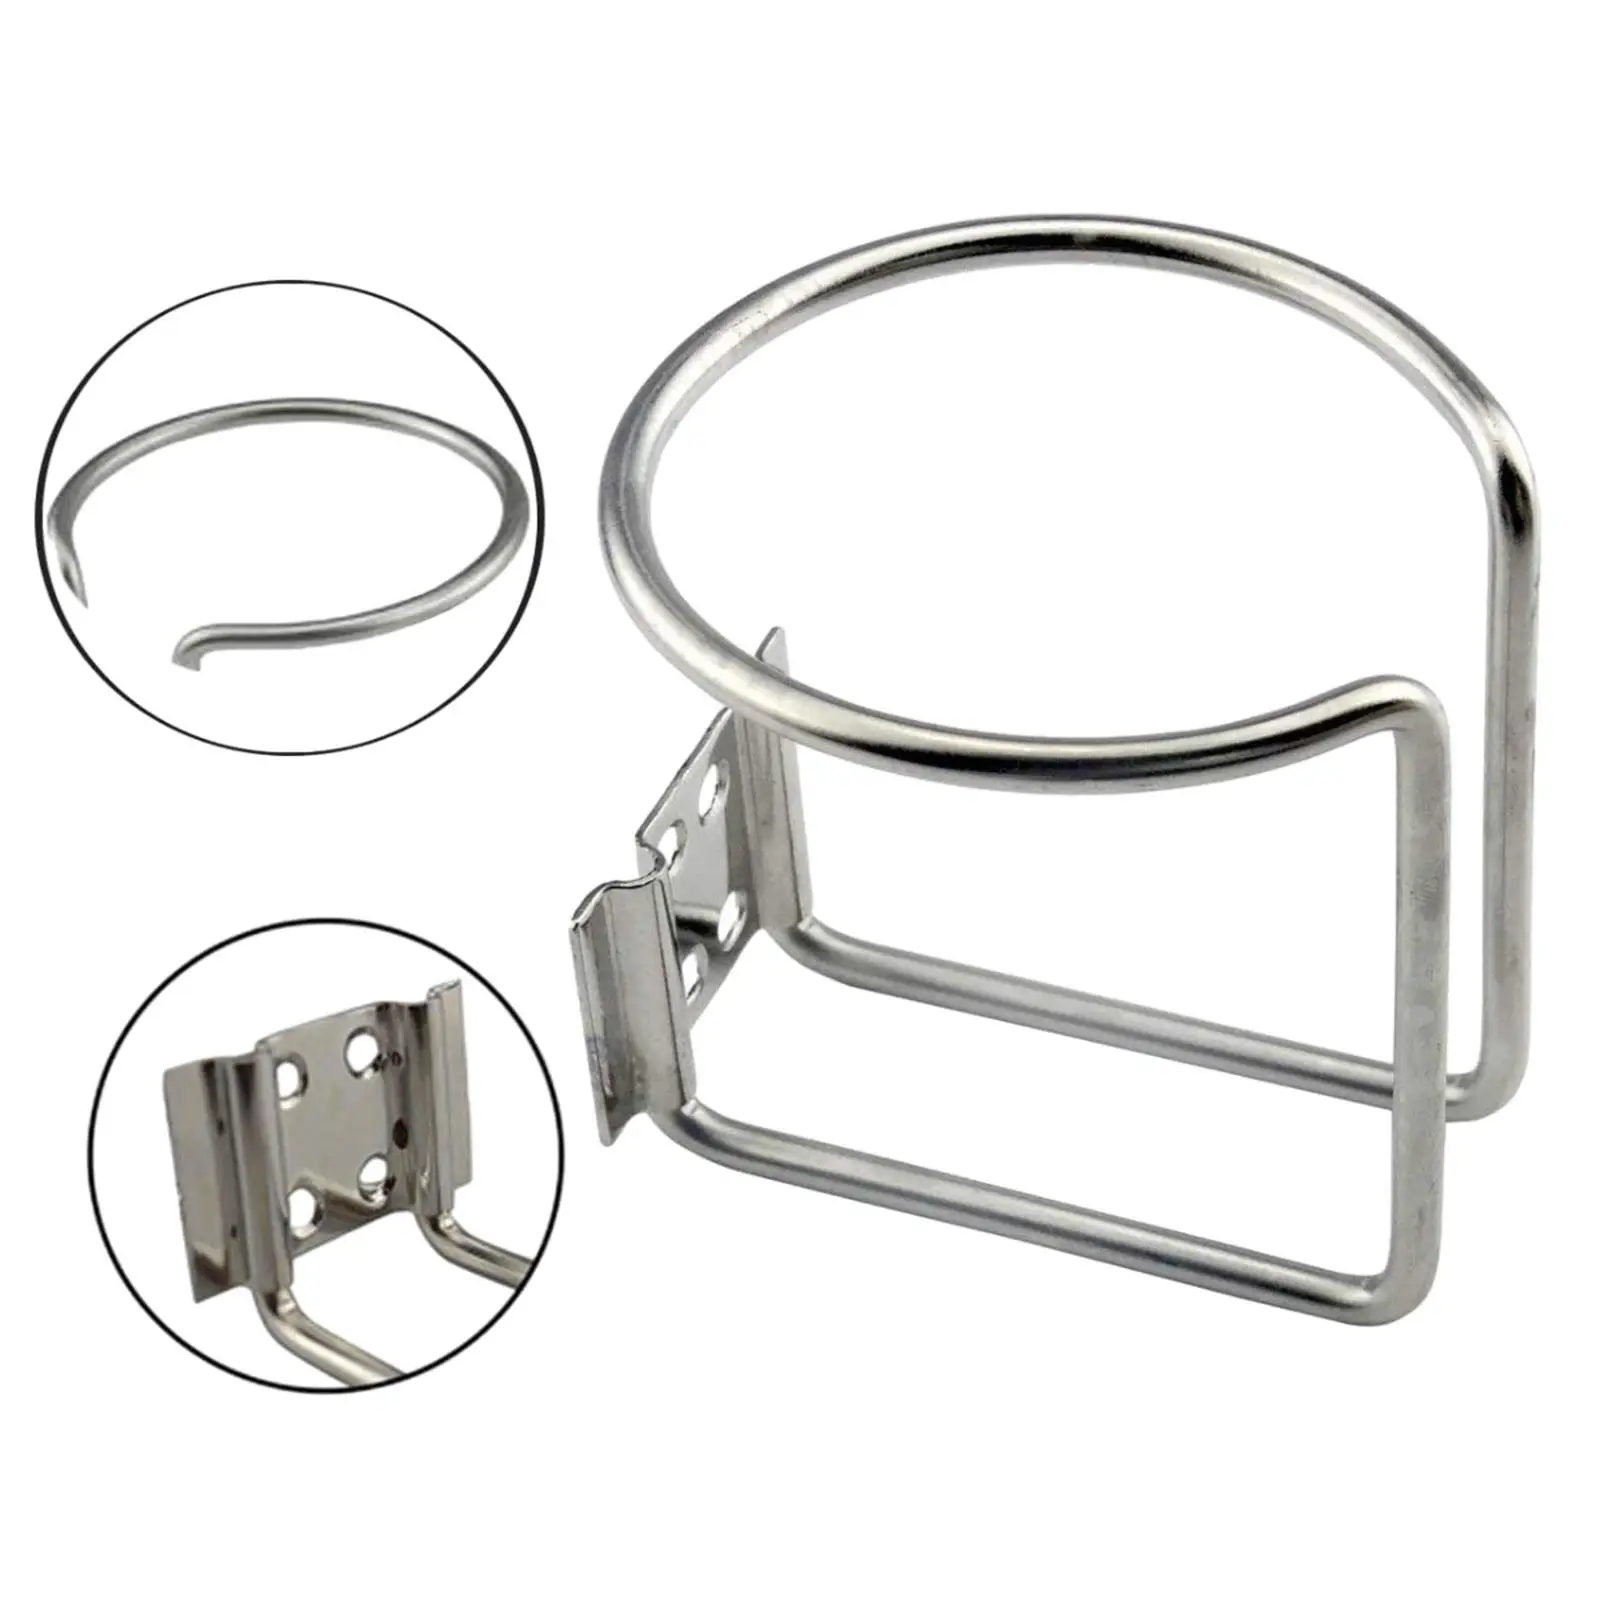 Boat Cup Holder Stainless Steel Cup Drink Holders for Car Trailer RV Truck